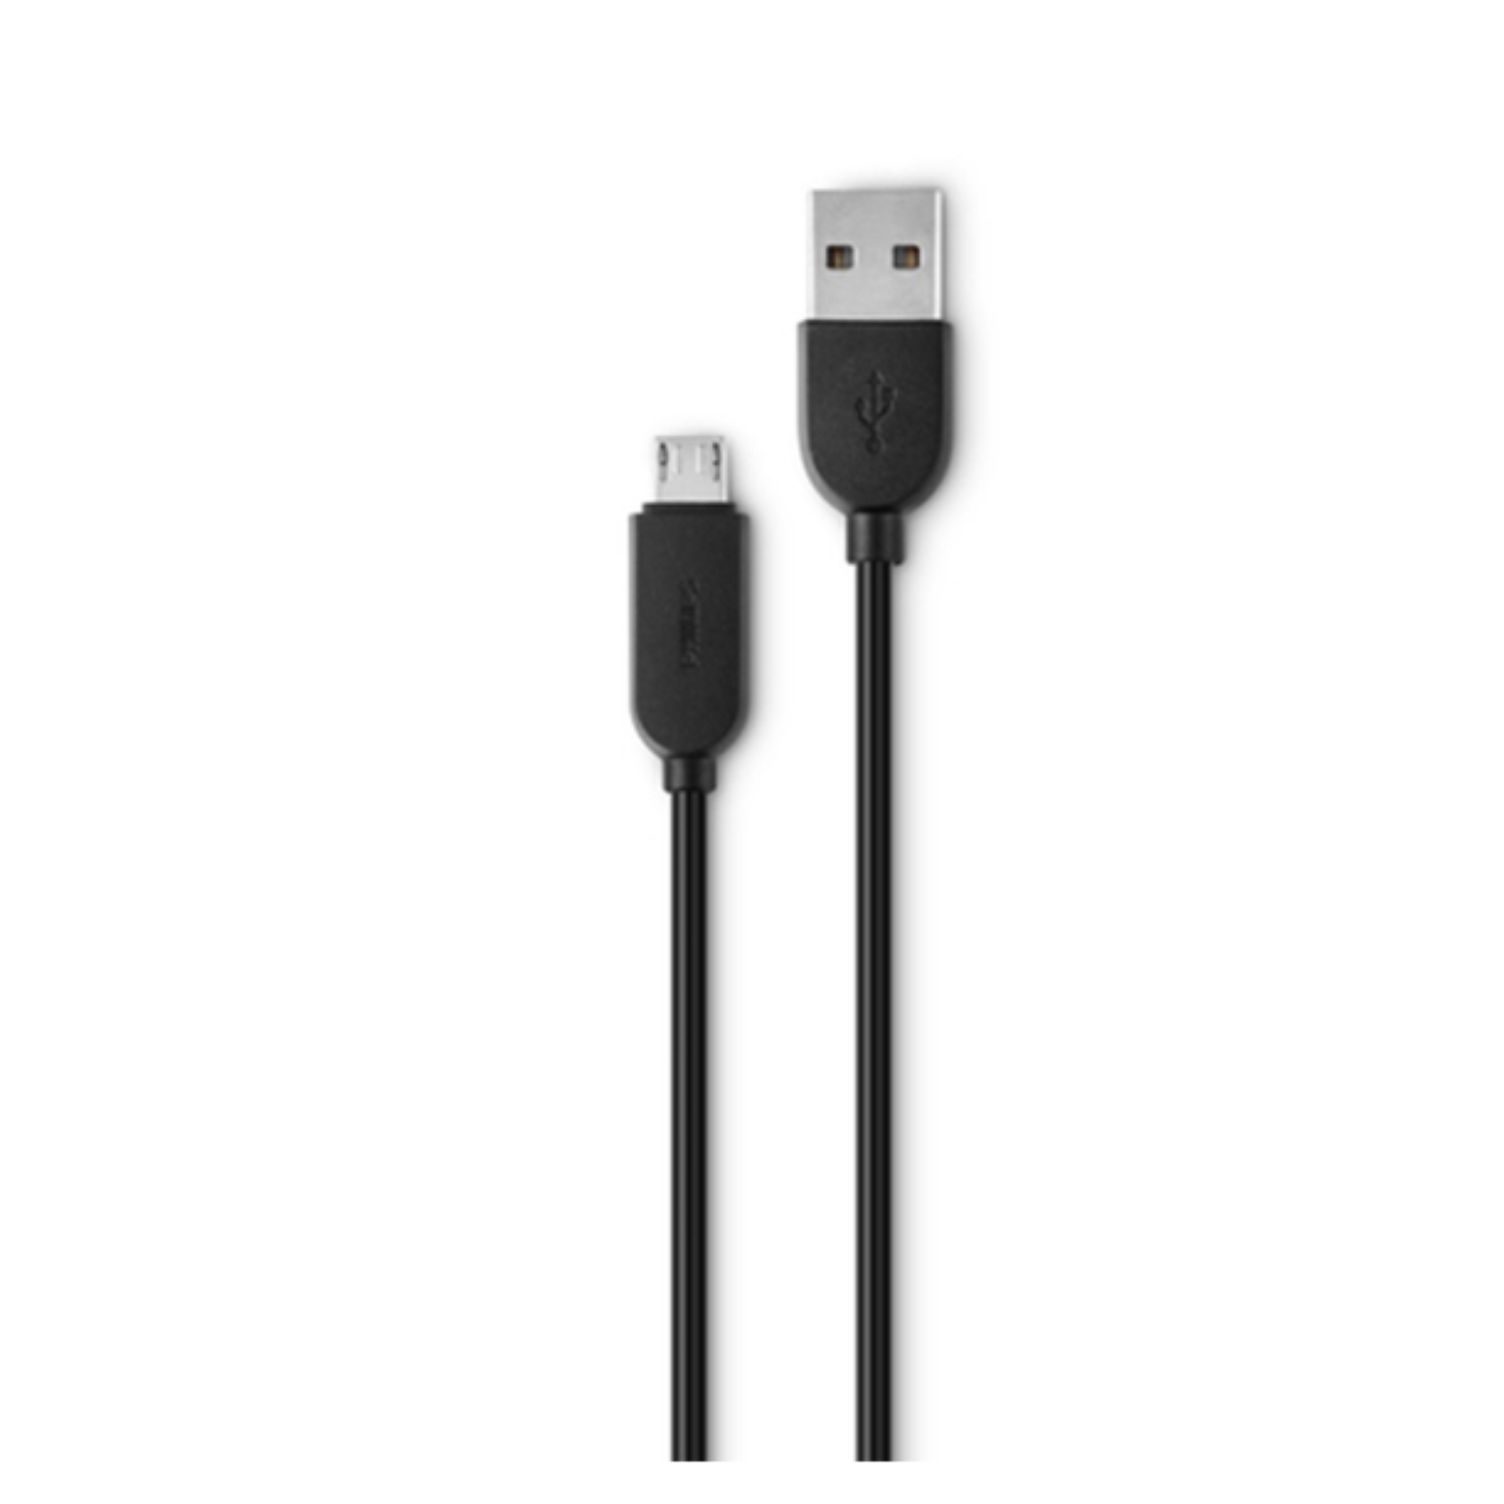 Male USB A to Male USB Micro B Cable, USB 2.0 1M (...